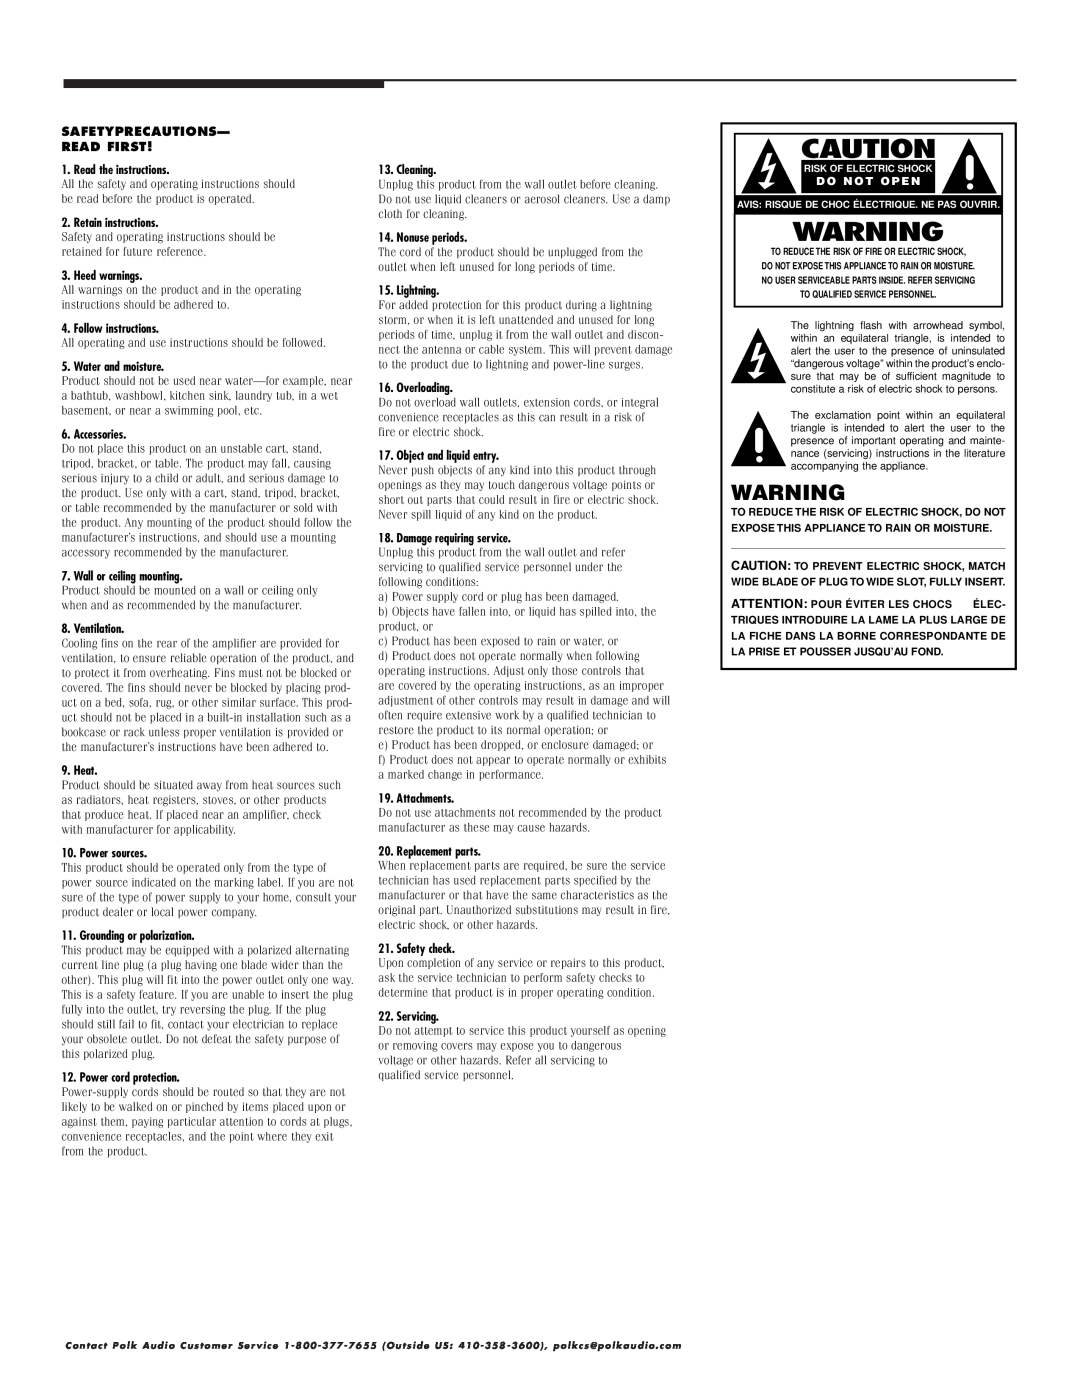 Polk Audio RTI100 owner manual Safetyprecautions- Read First 